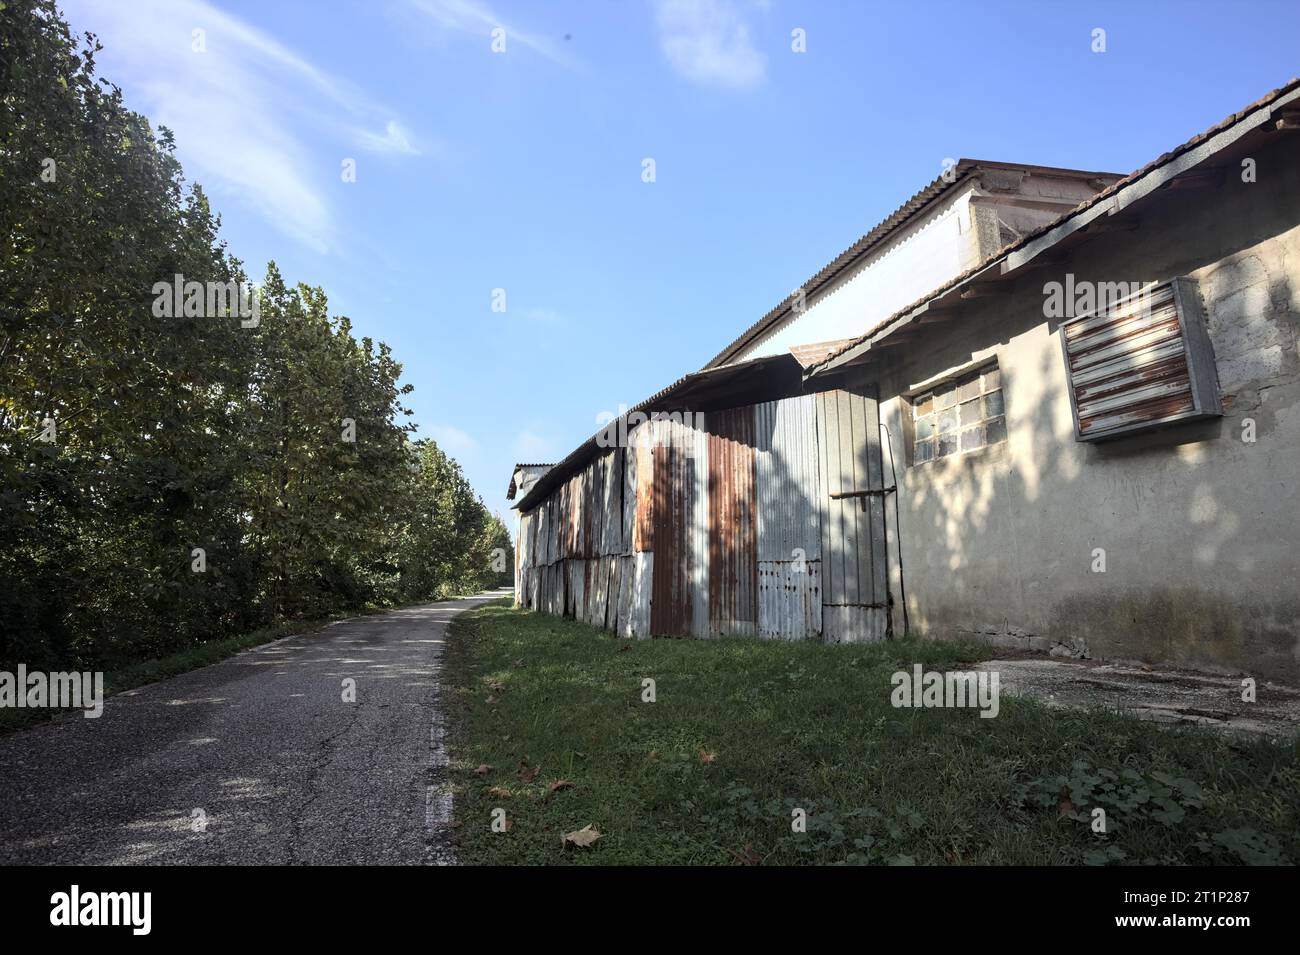 Narrow  road bordered by a row of trees next to a building in the italian countryside Stock Photo